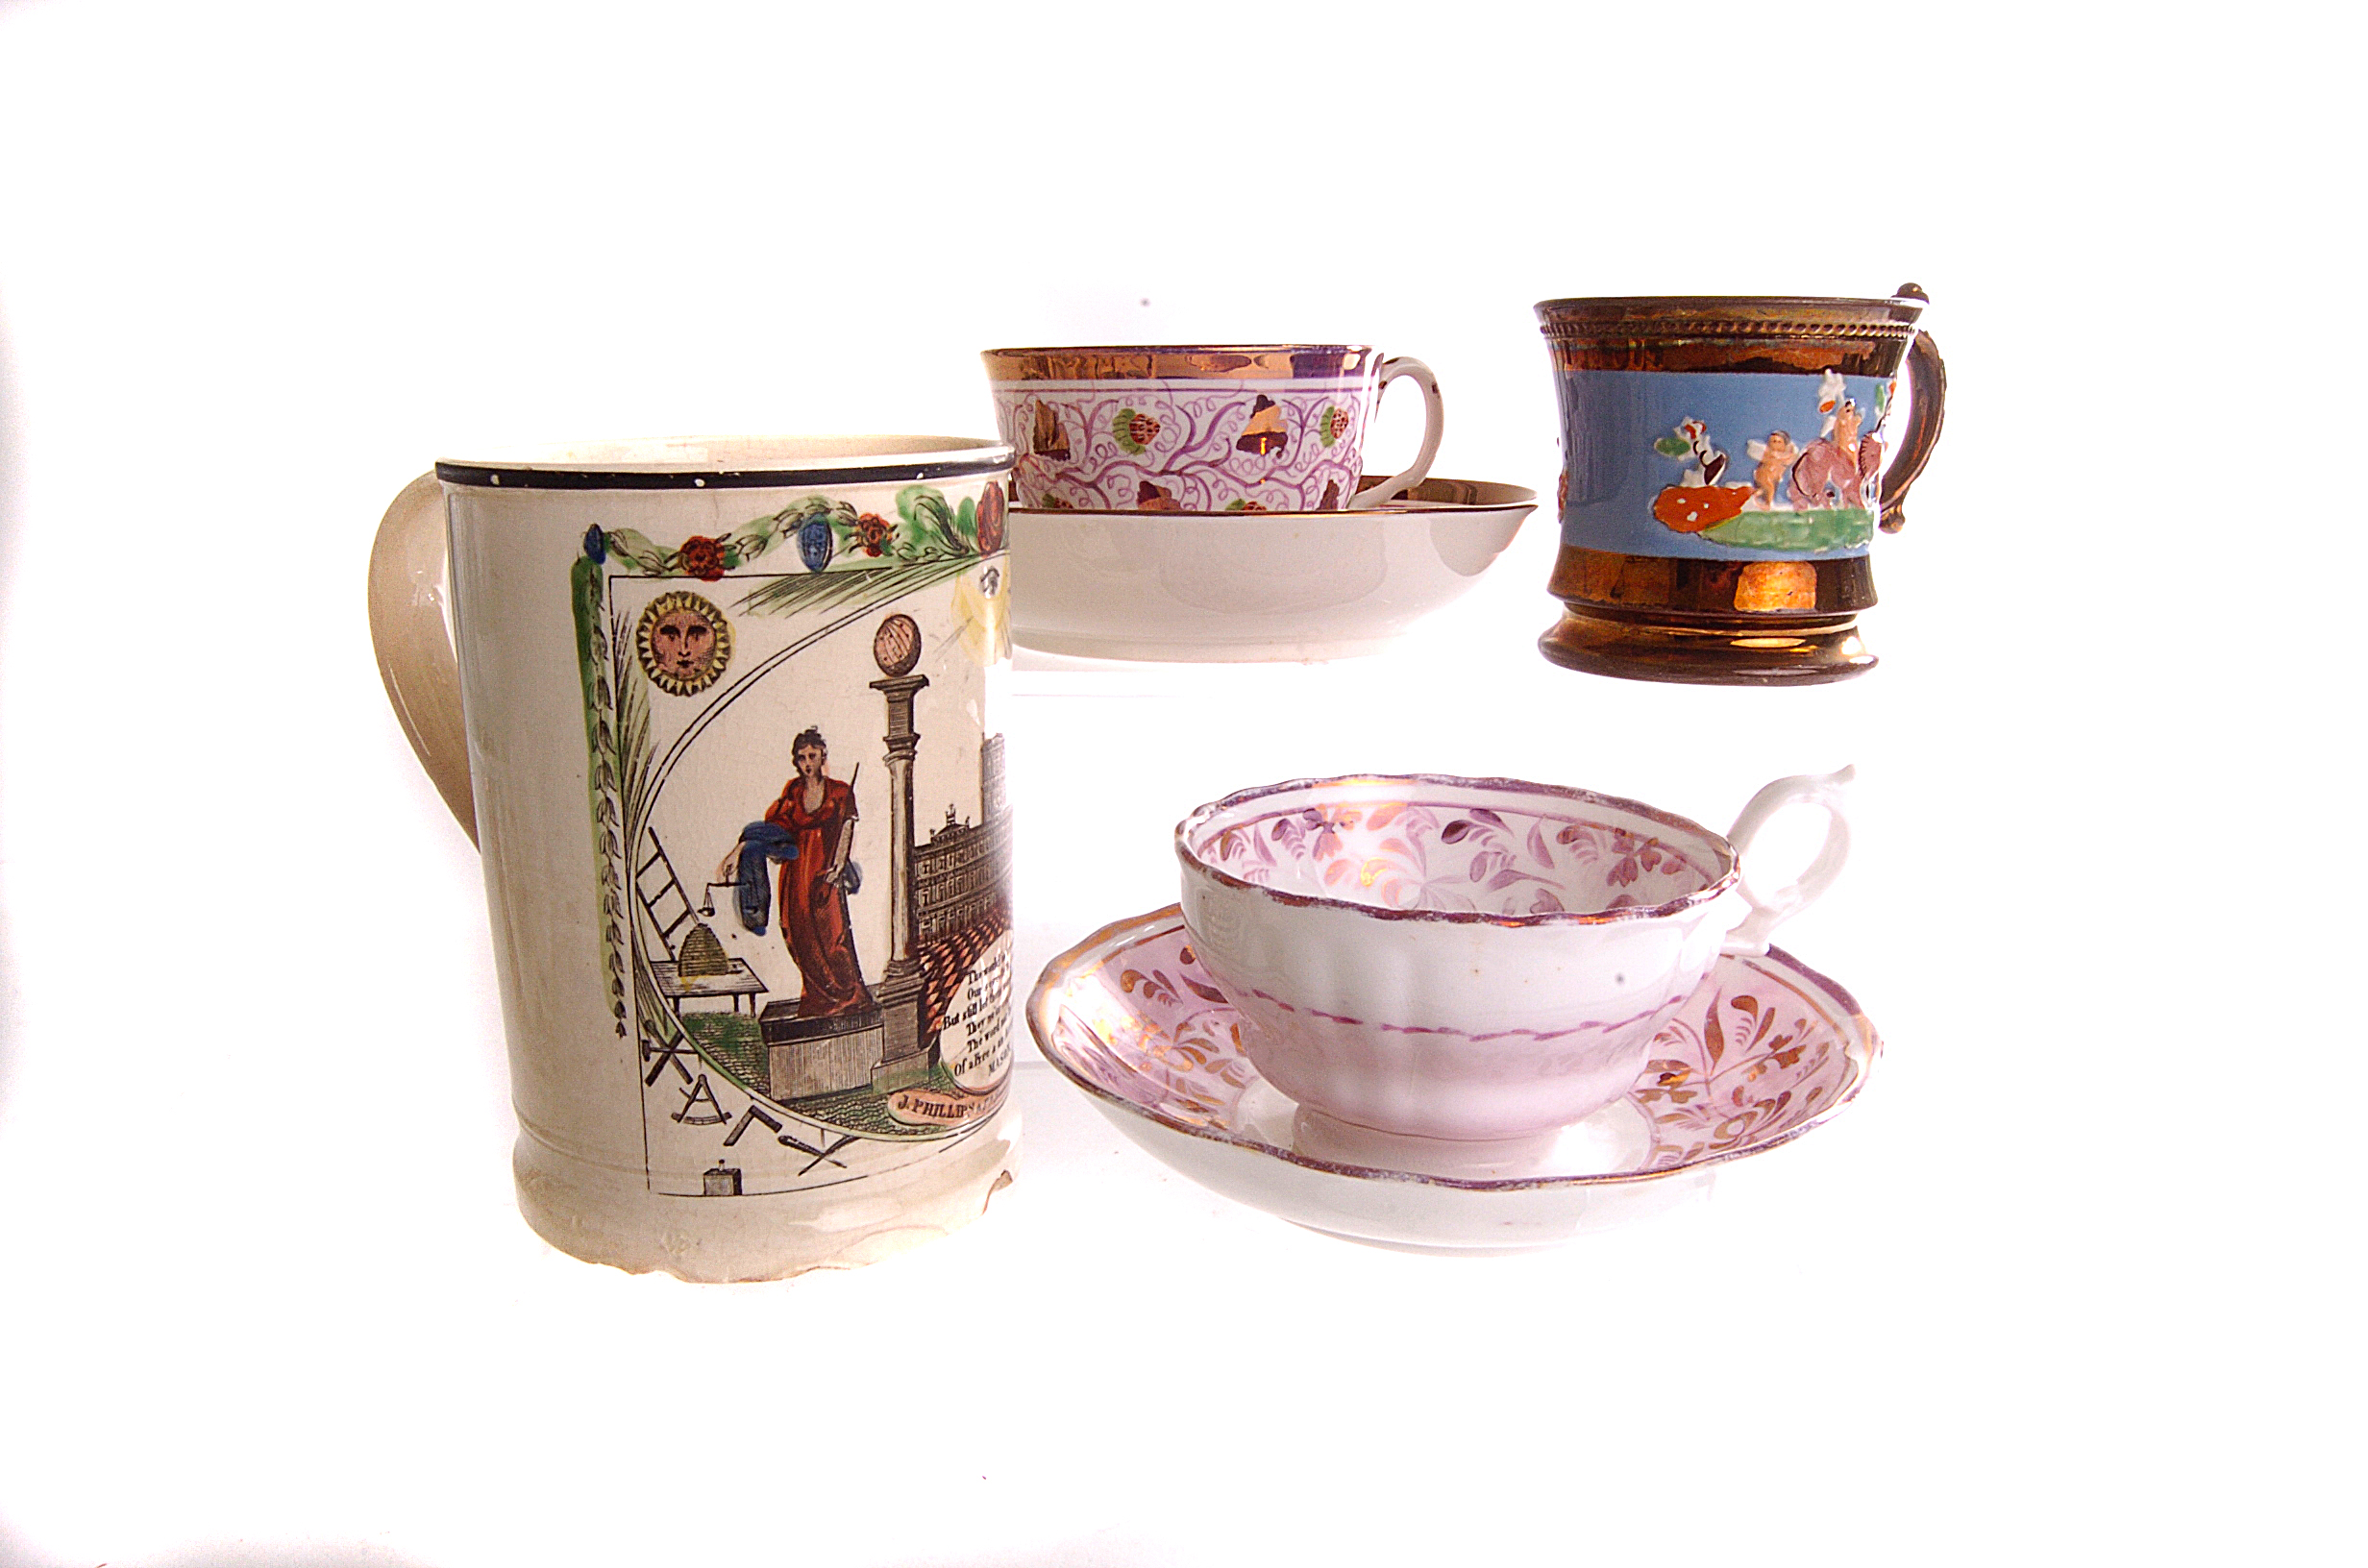 A J.Pillips & Co Masonic tankard, together with two Lustre ware cups and saucers and a bronze